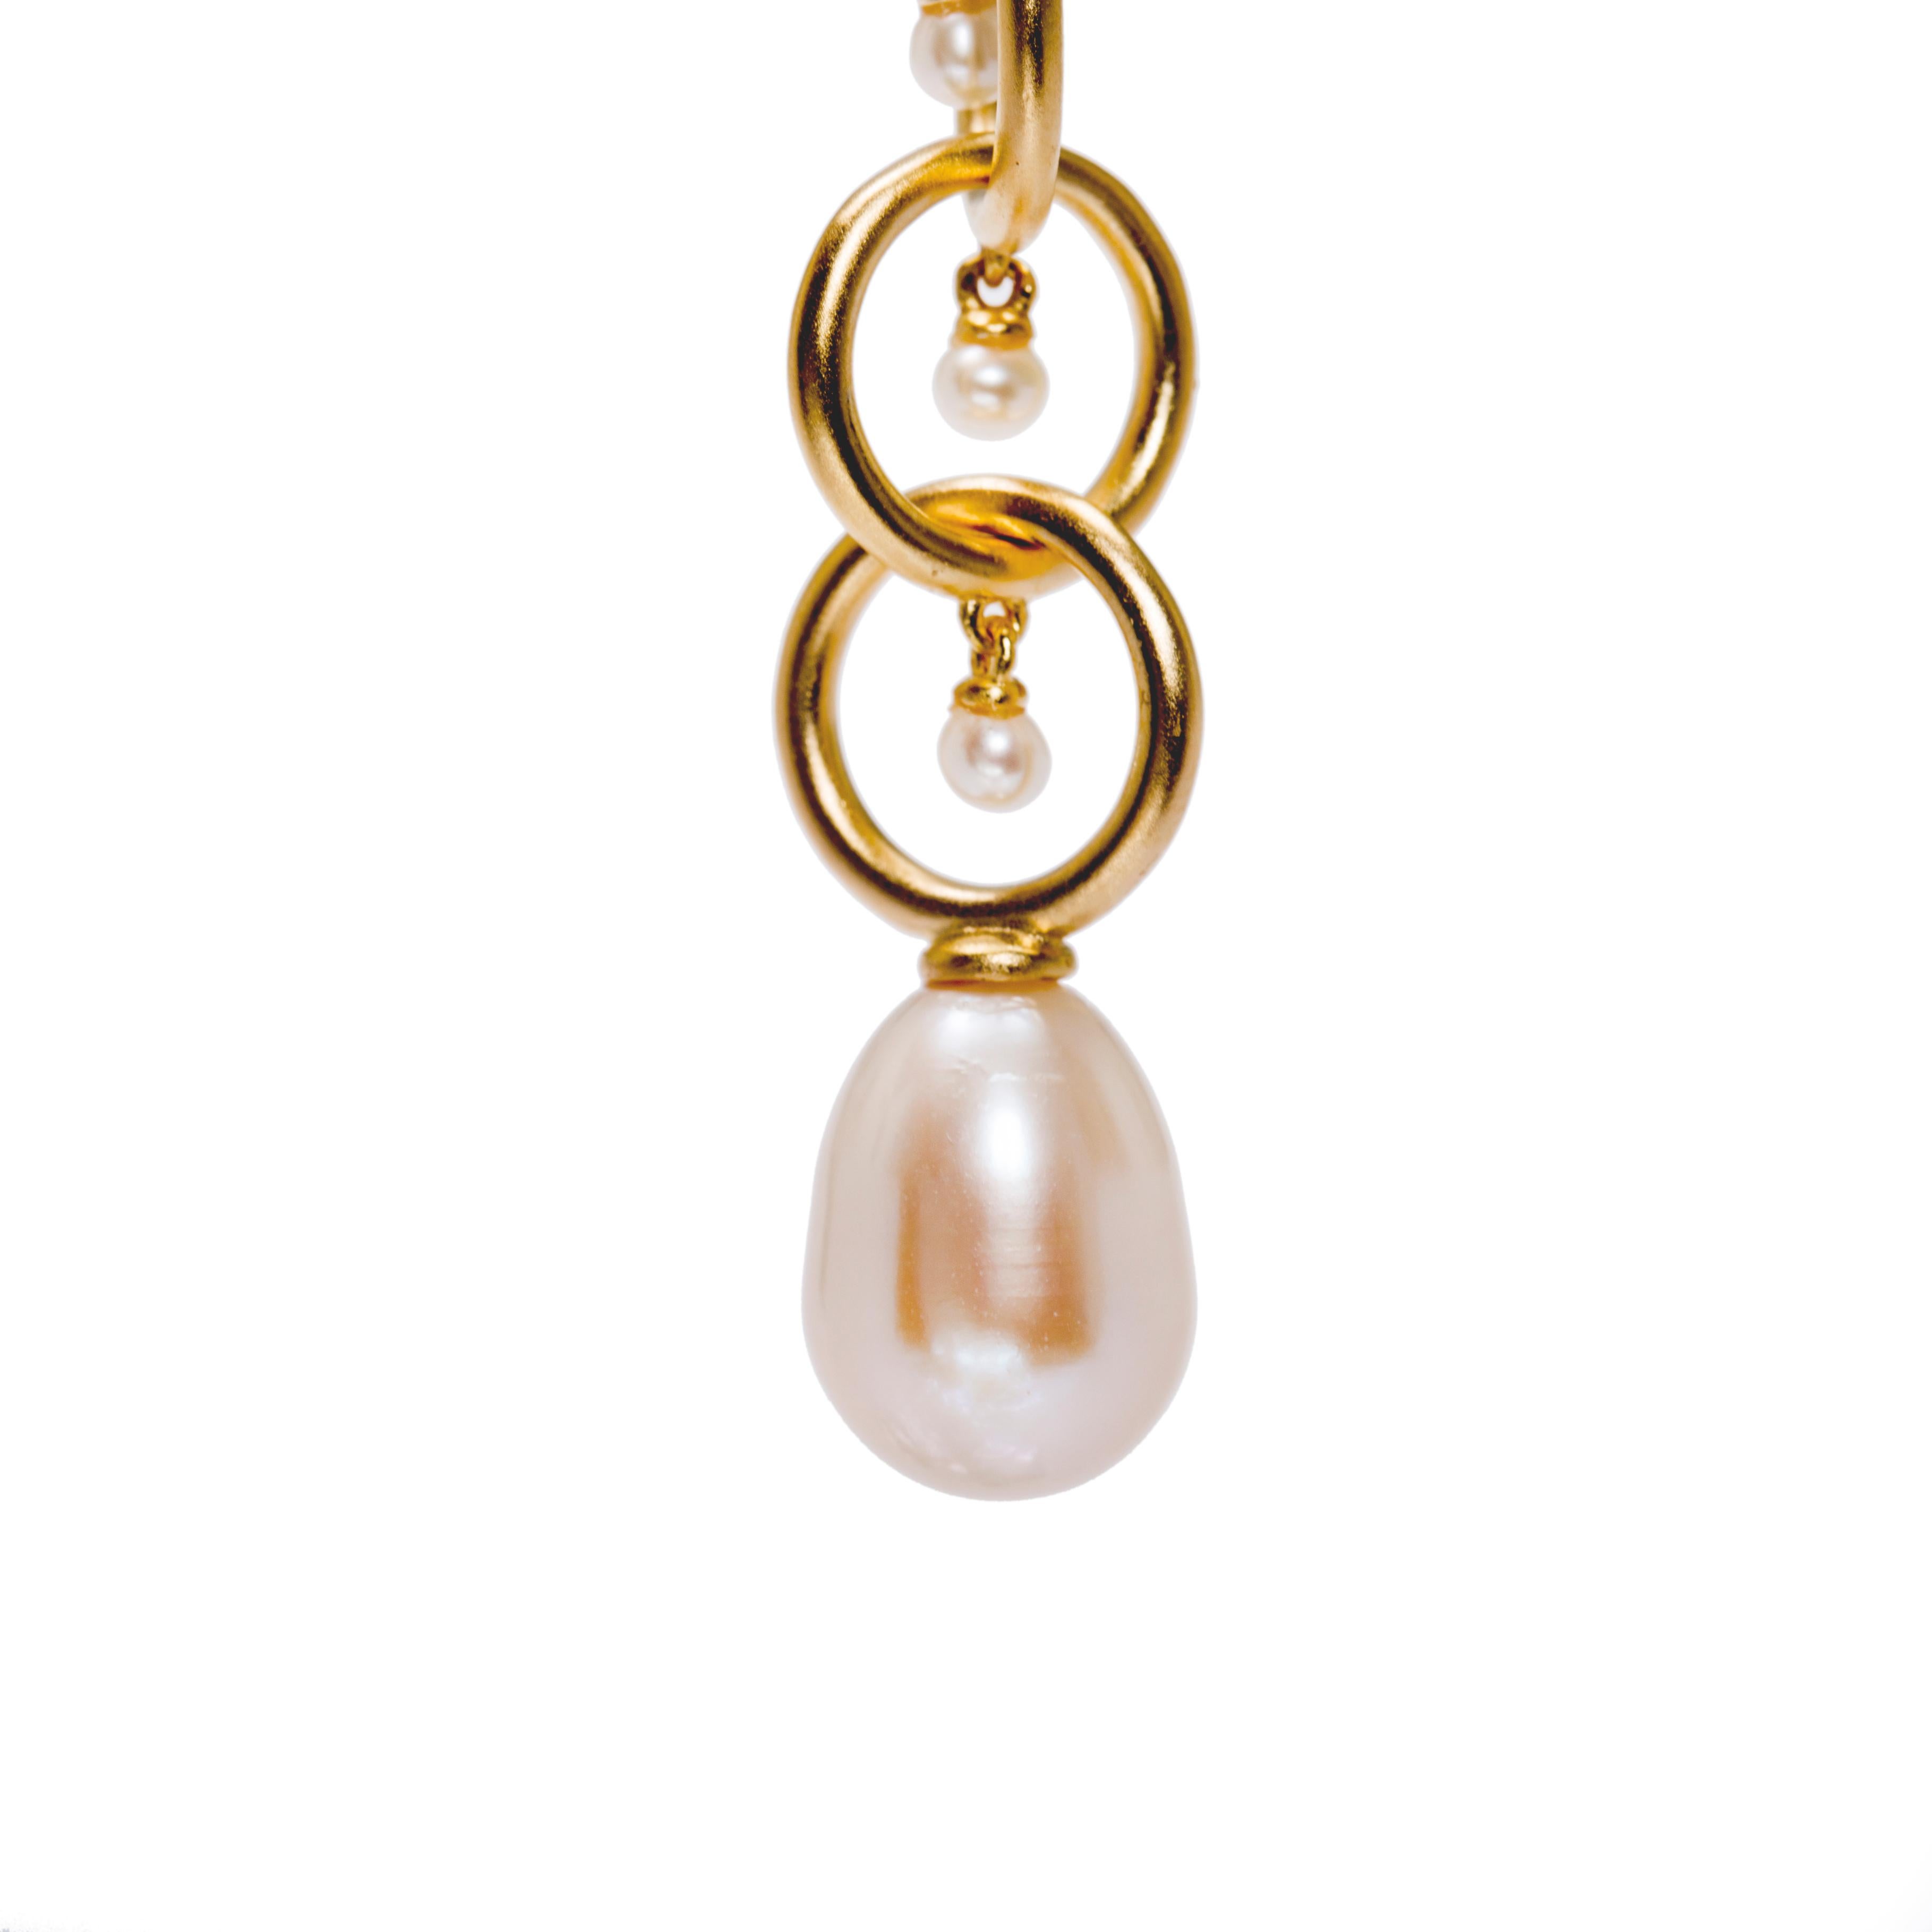 Cabochon Ammanii Drop Earrings Vermeil Gold with Pearls and Green Chrysoprase